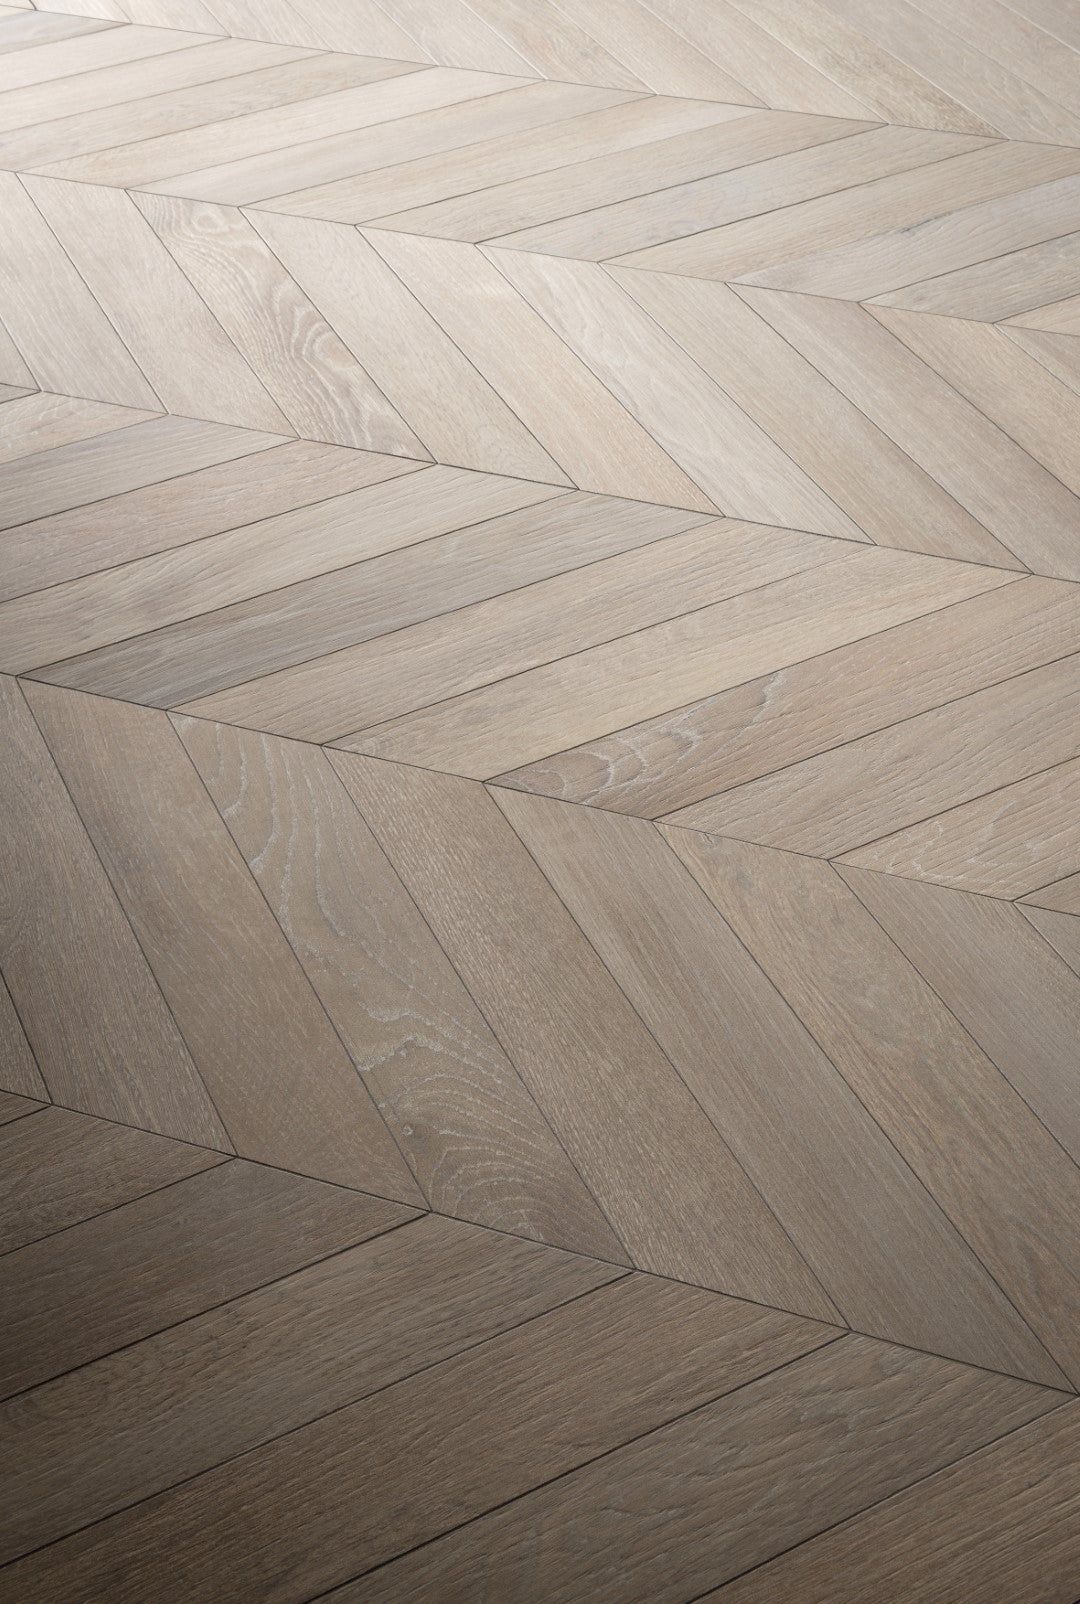 Beauty and durability in one go: wood
floor tiles